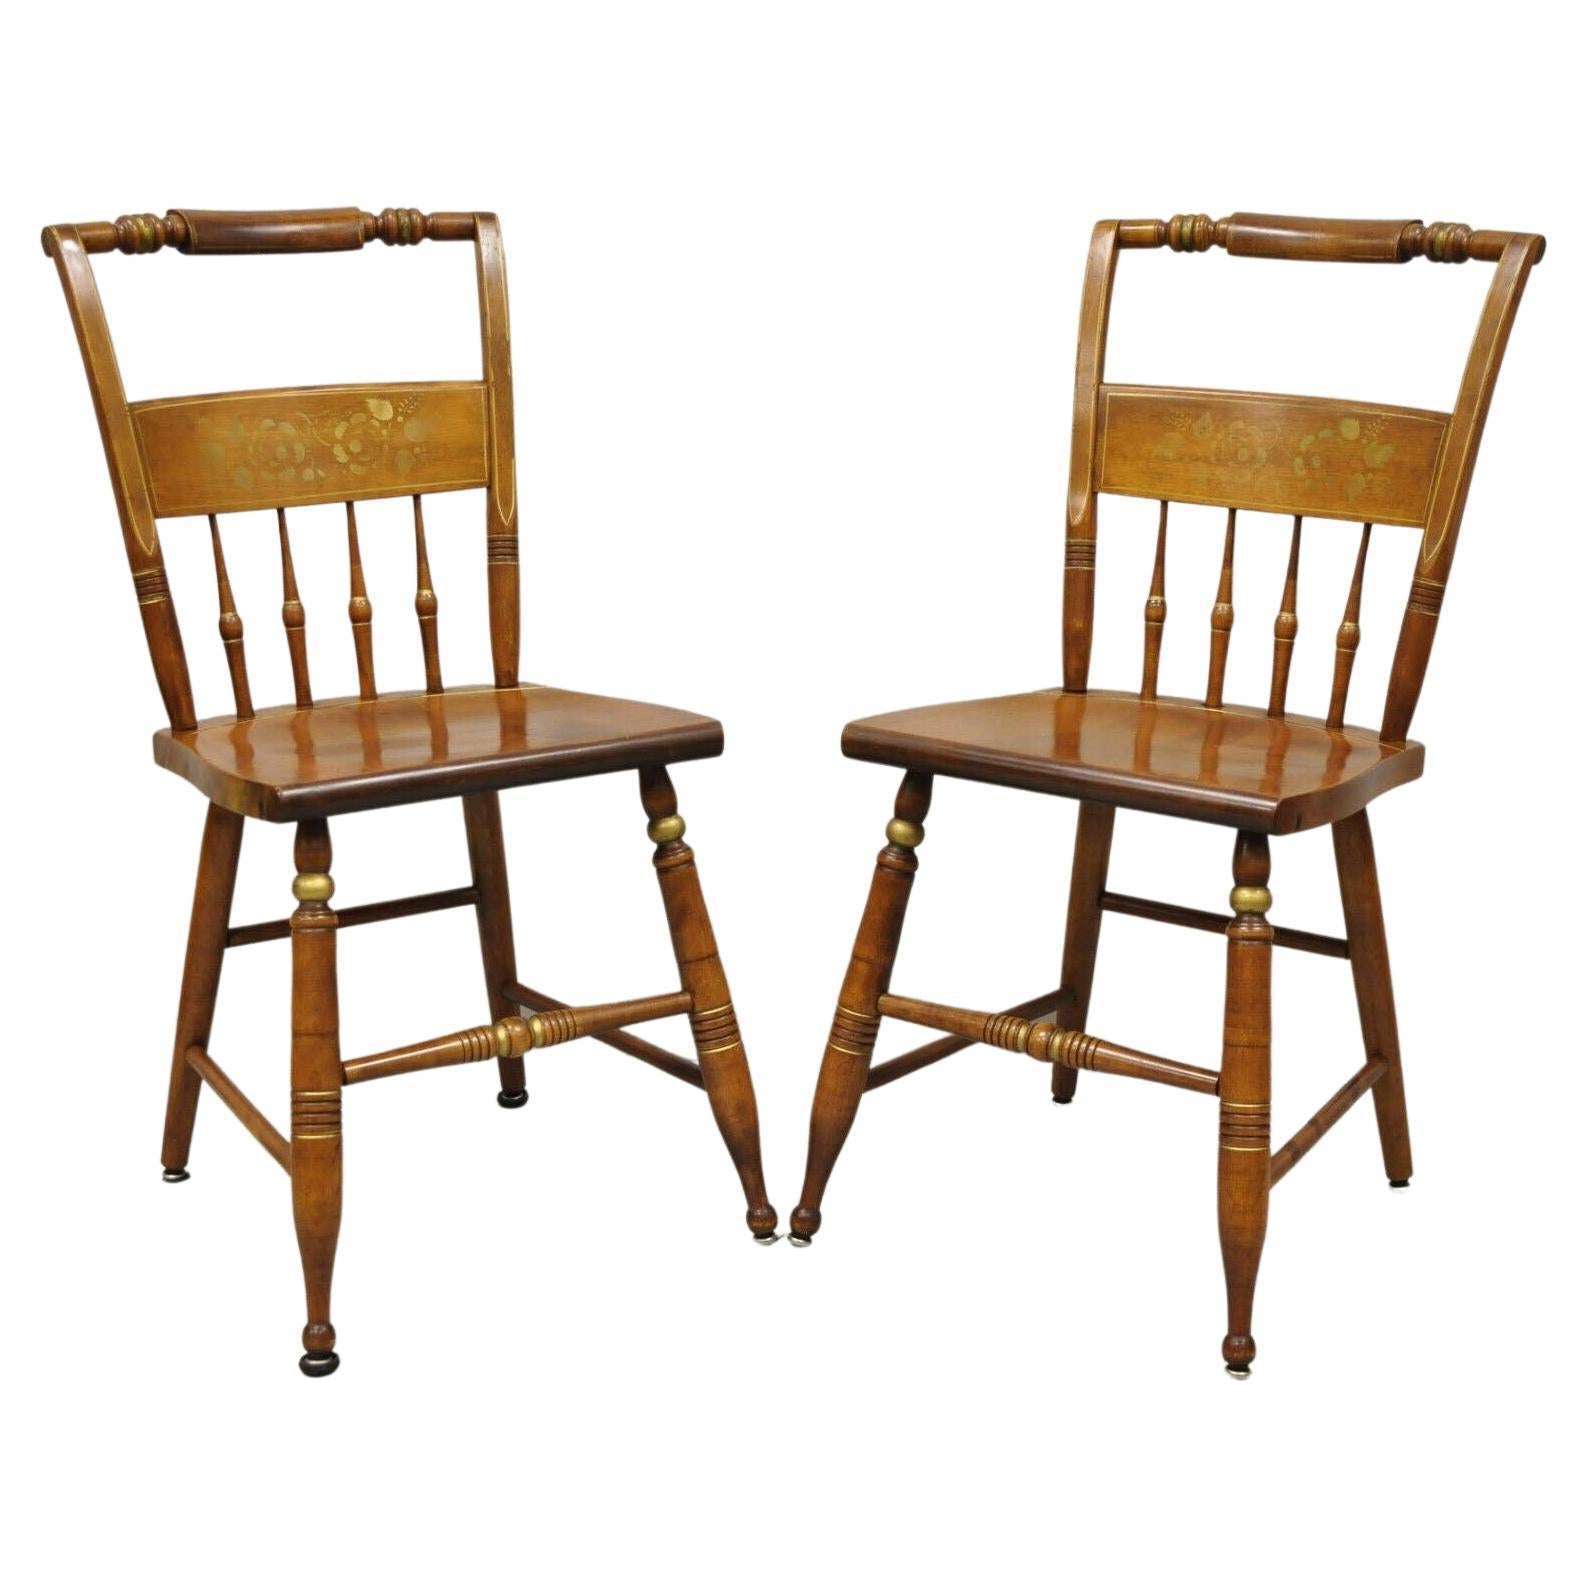 Vintage S. Bent Bros Maple Wood Hitchcock Colonial Style Chairs, a Pair